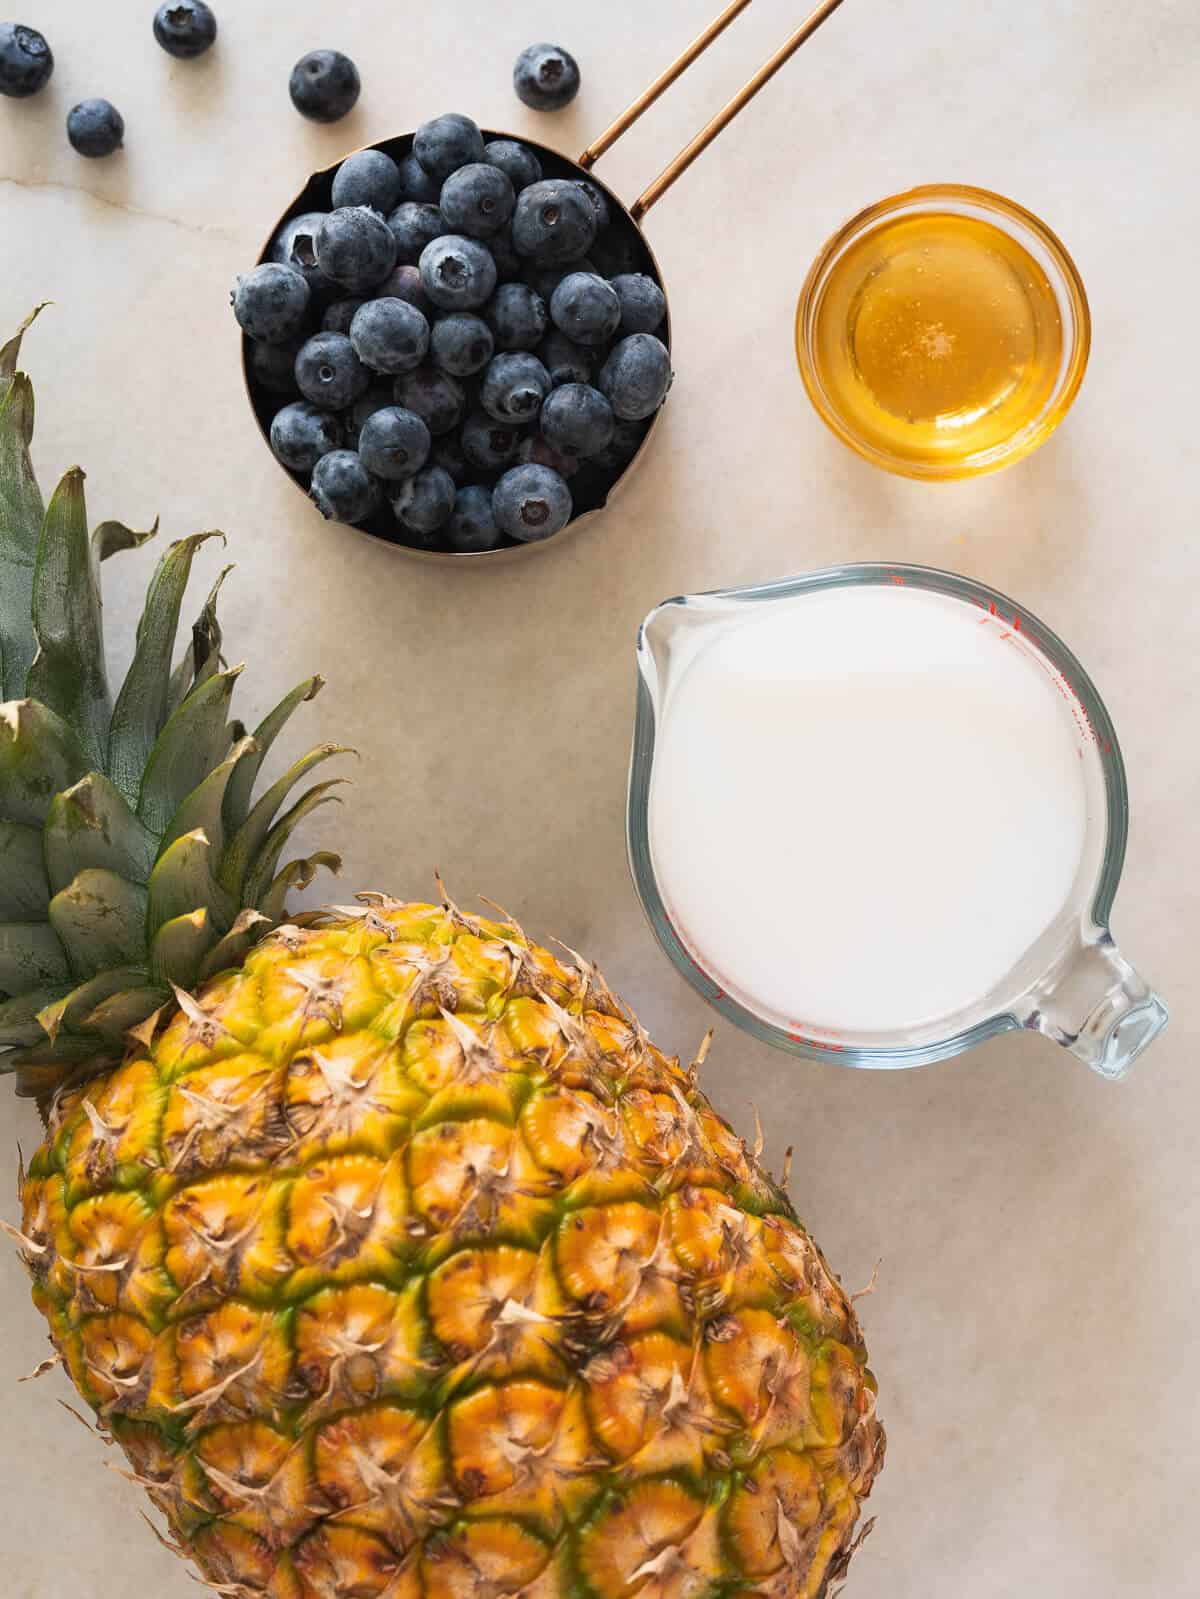 ingredients to make blueberry pineapple juice on a table.